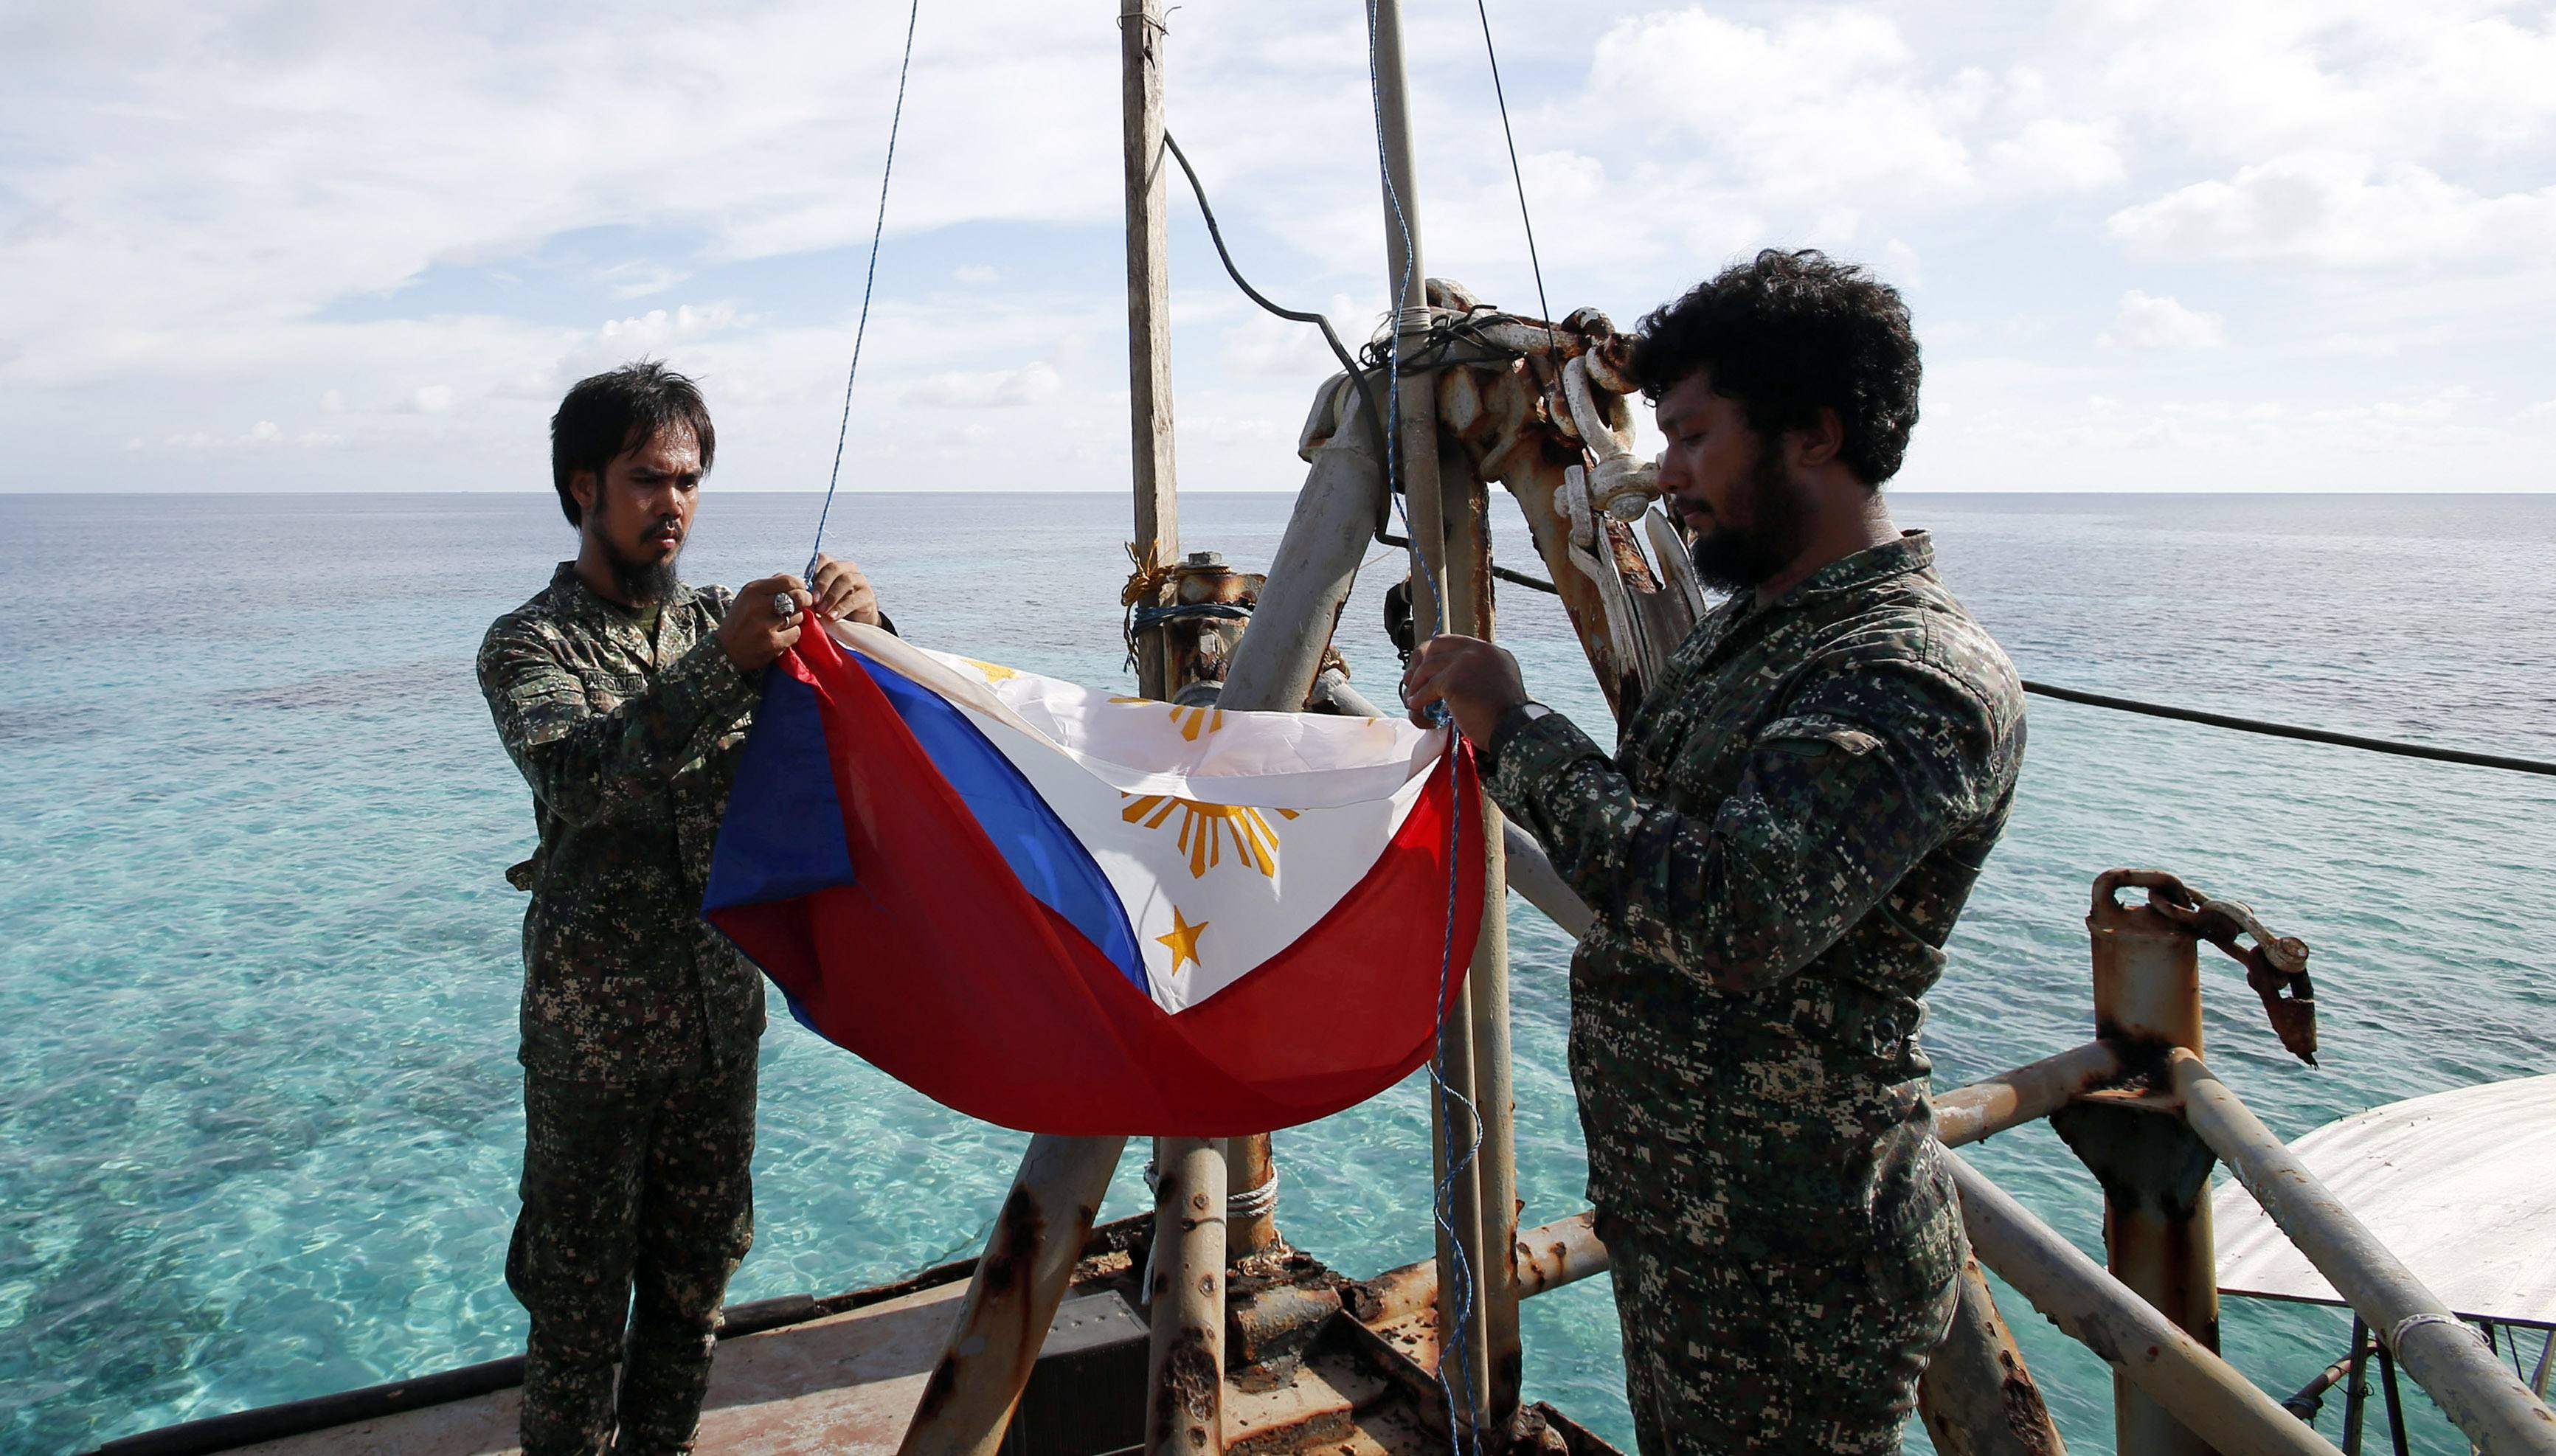 Marines, members of a military detachment stationed aboard the BRP Sierra Madre, fold up a Philippine national flag during a flag retreat on the ship, at the disputed Second Thomas Shoal. Photo: Reuters